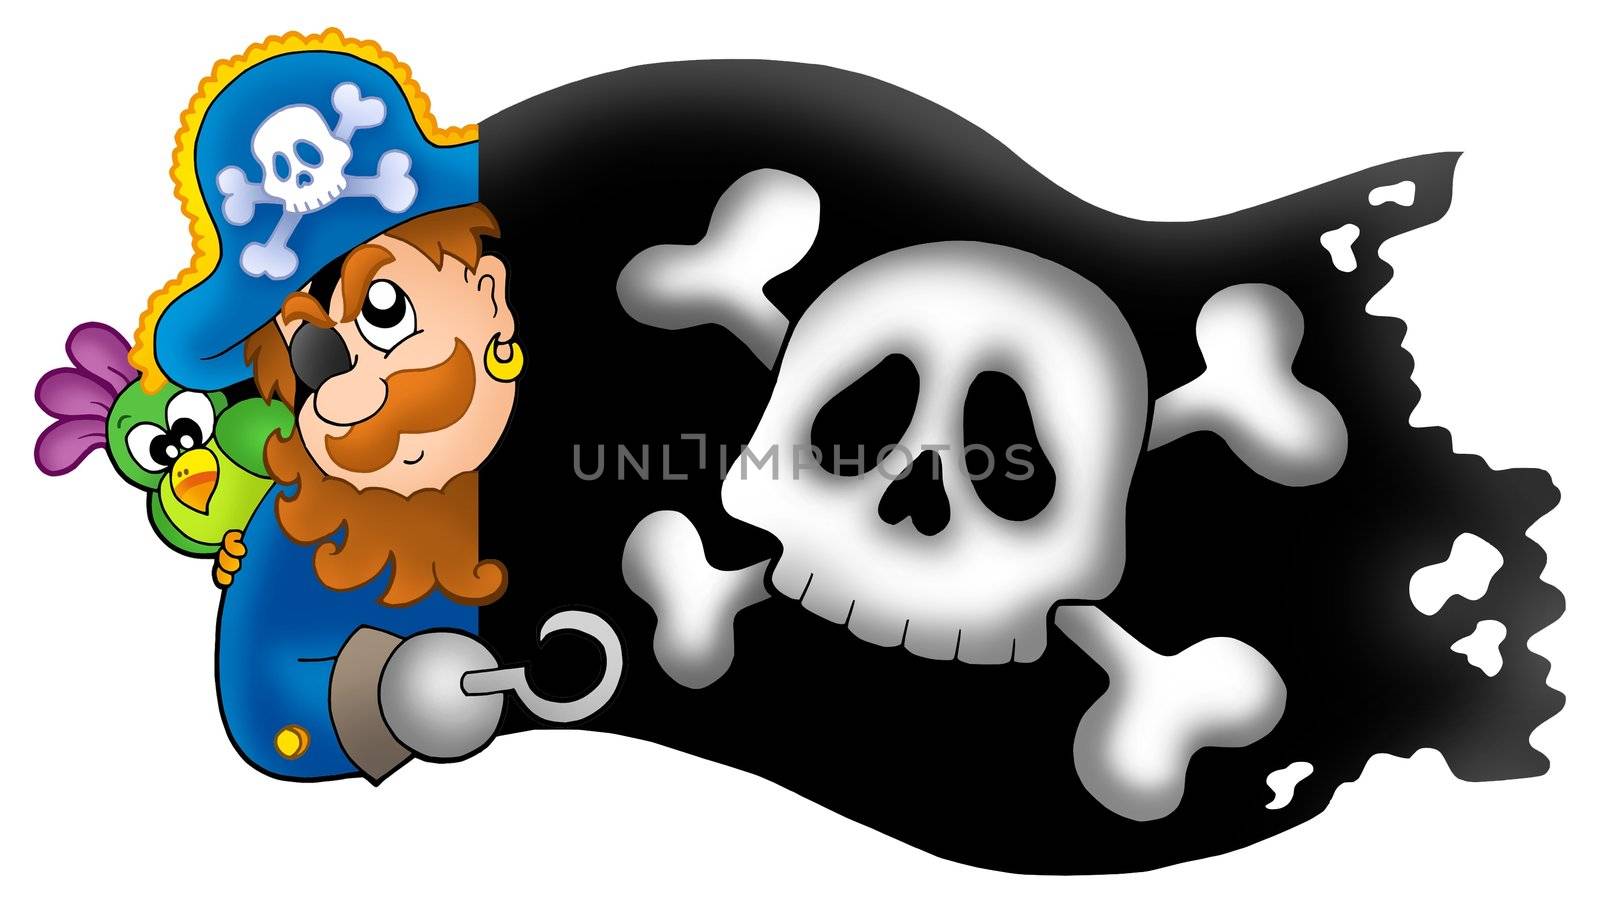 Lurking pirate with banner - color illustration.